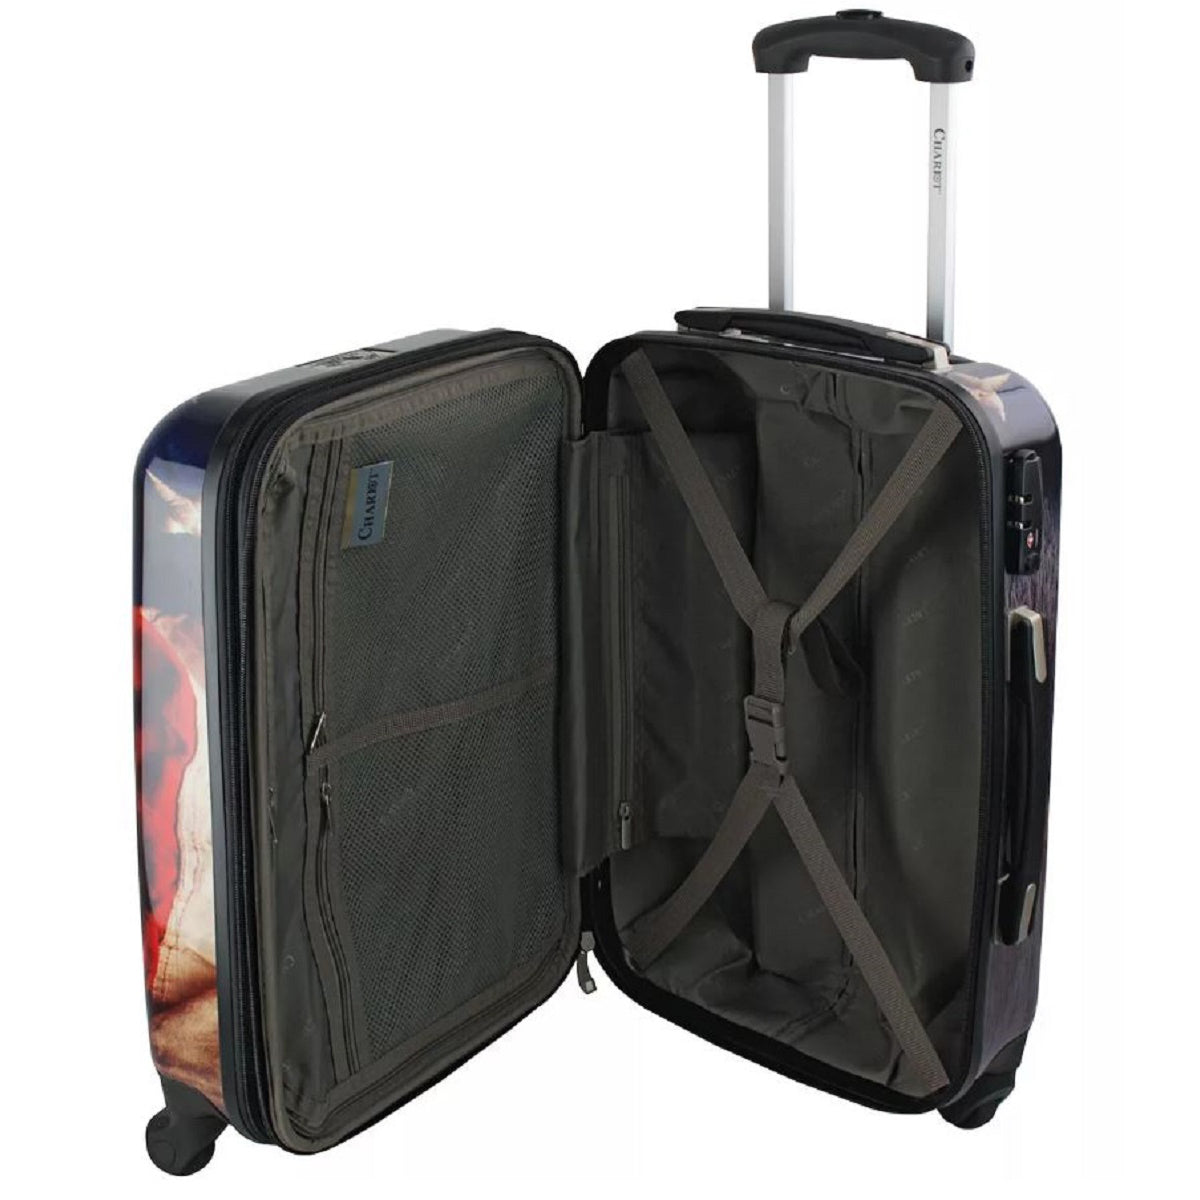 Chariot Freedom Pups 20-Inch Carry-On Hardside Expandable Spinner Luggage